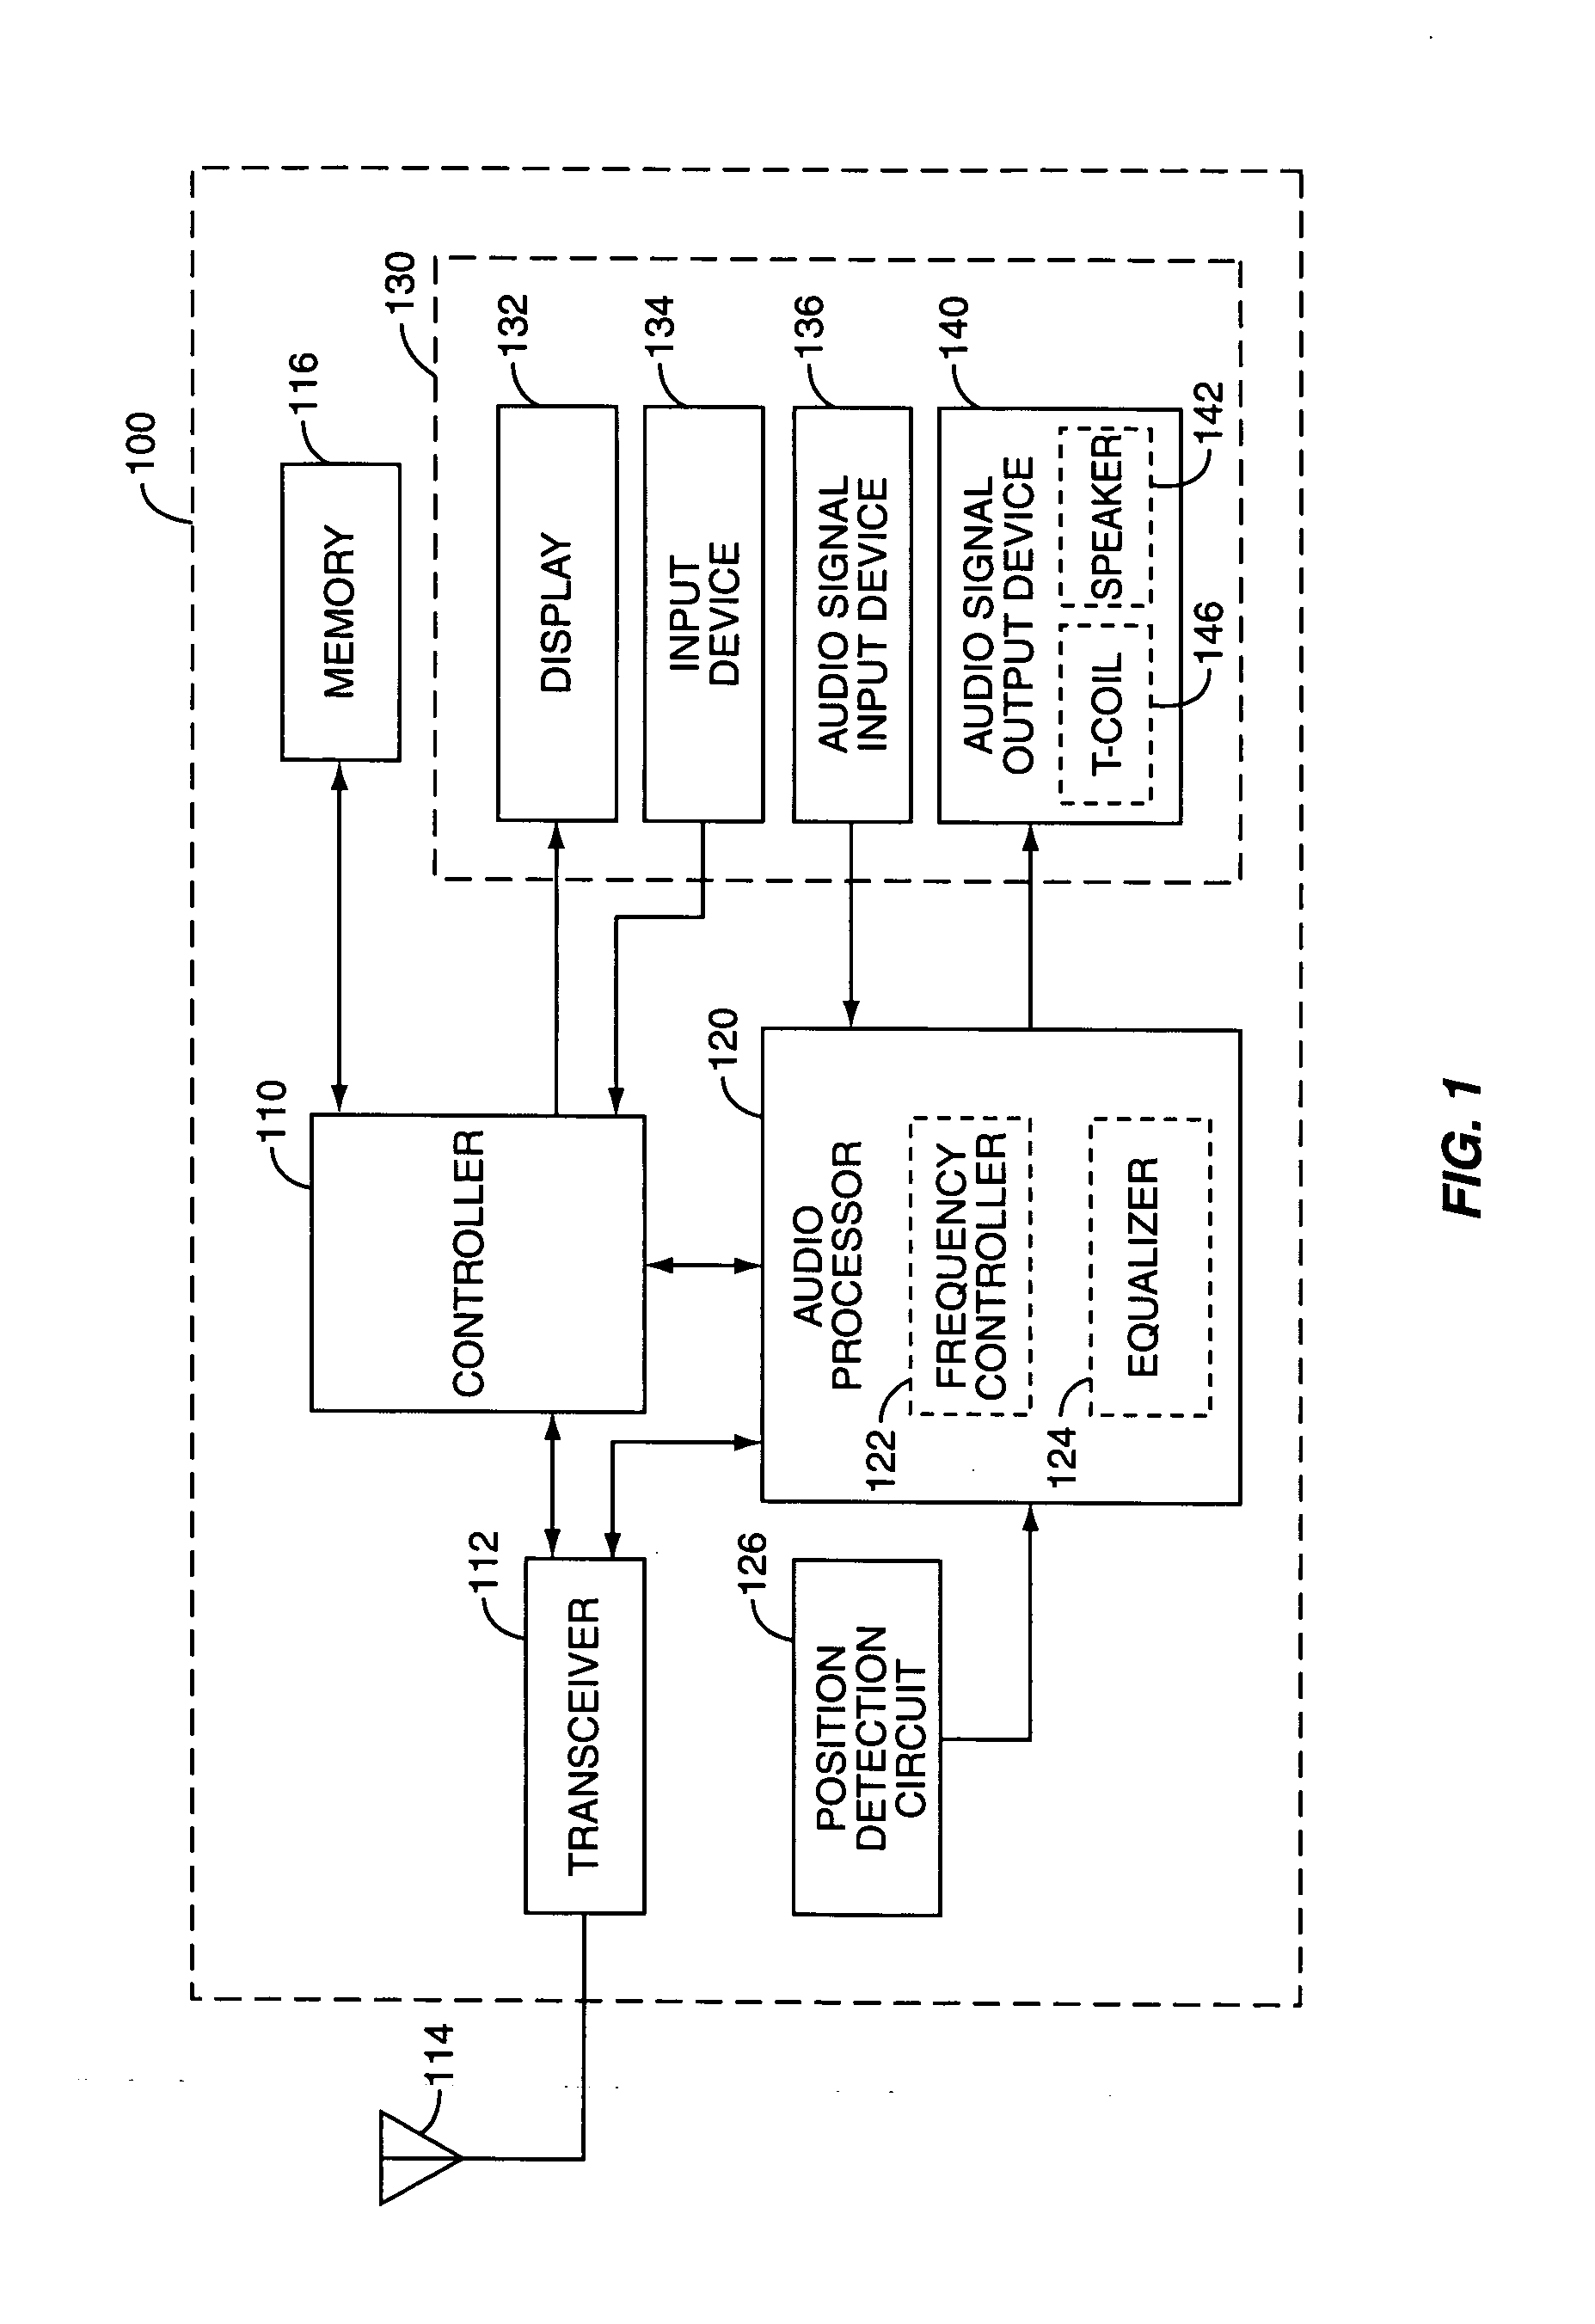 Method and apparatus for improved mobile station and hearing aid compatibility